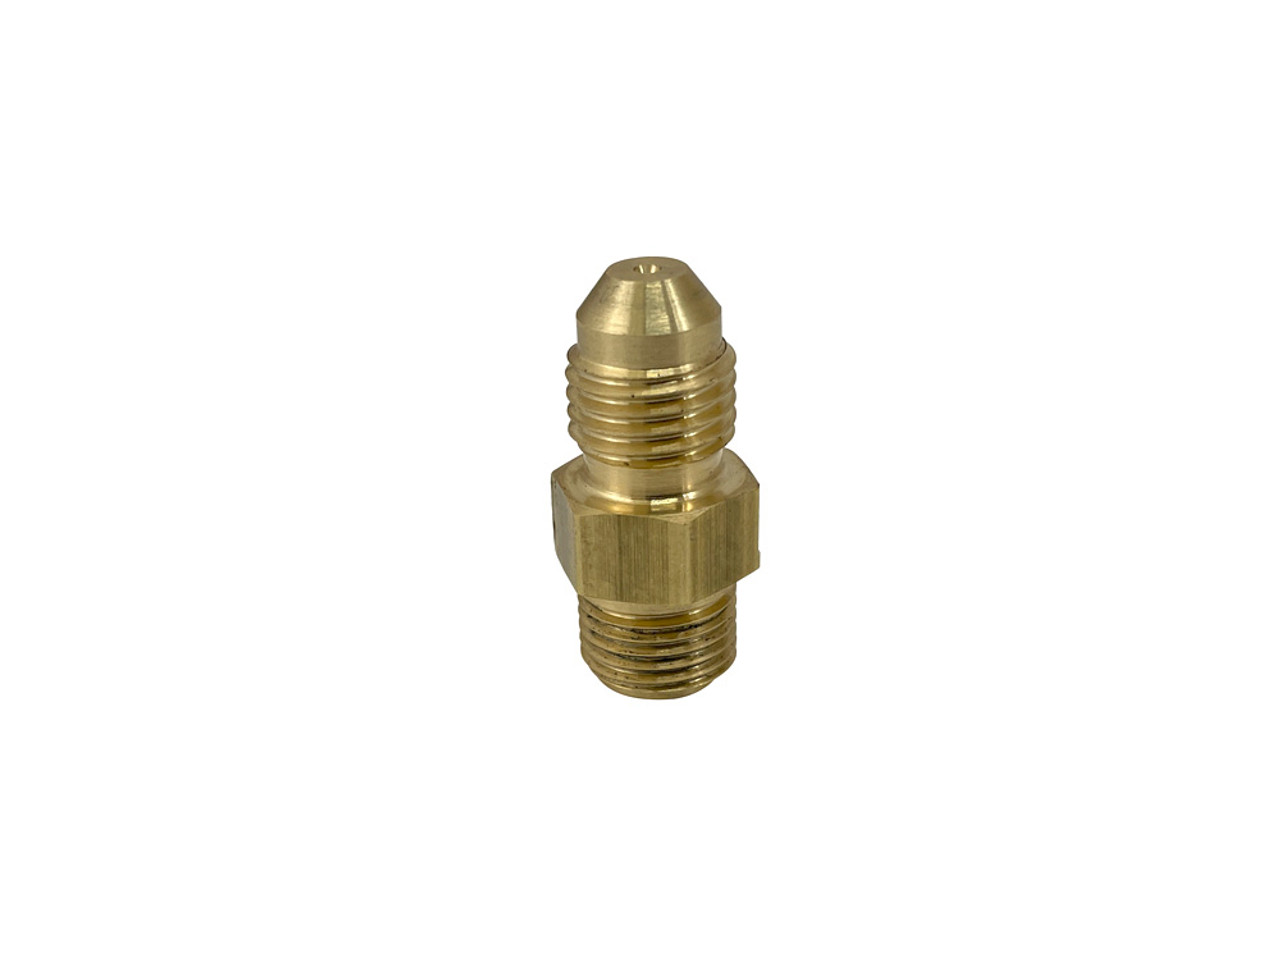 750 Piece, Compression Fitting Kit